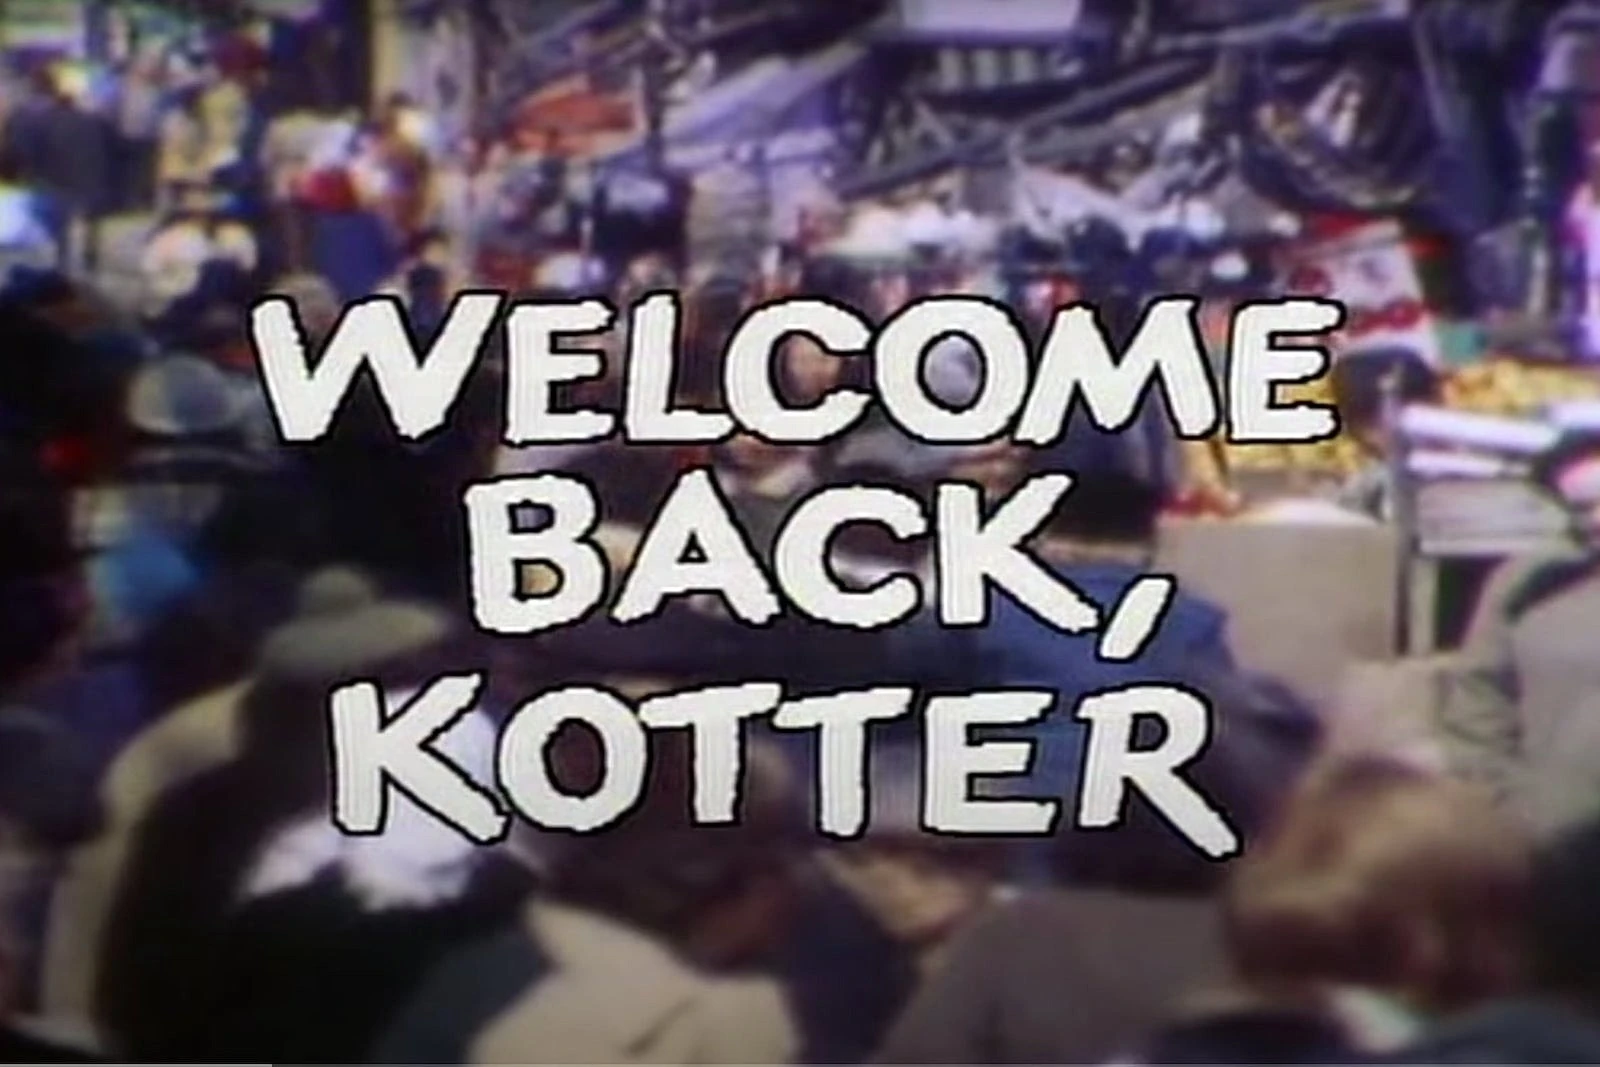 Welcome Back, Kotter title screen from television show